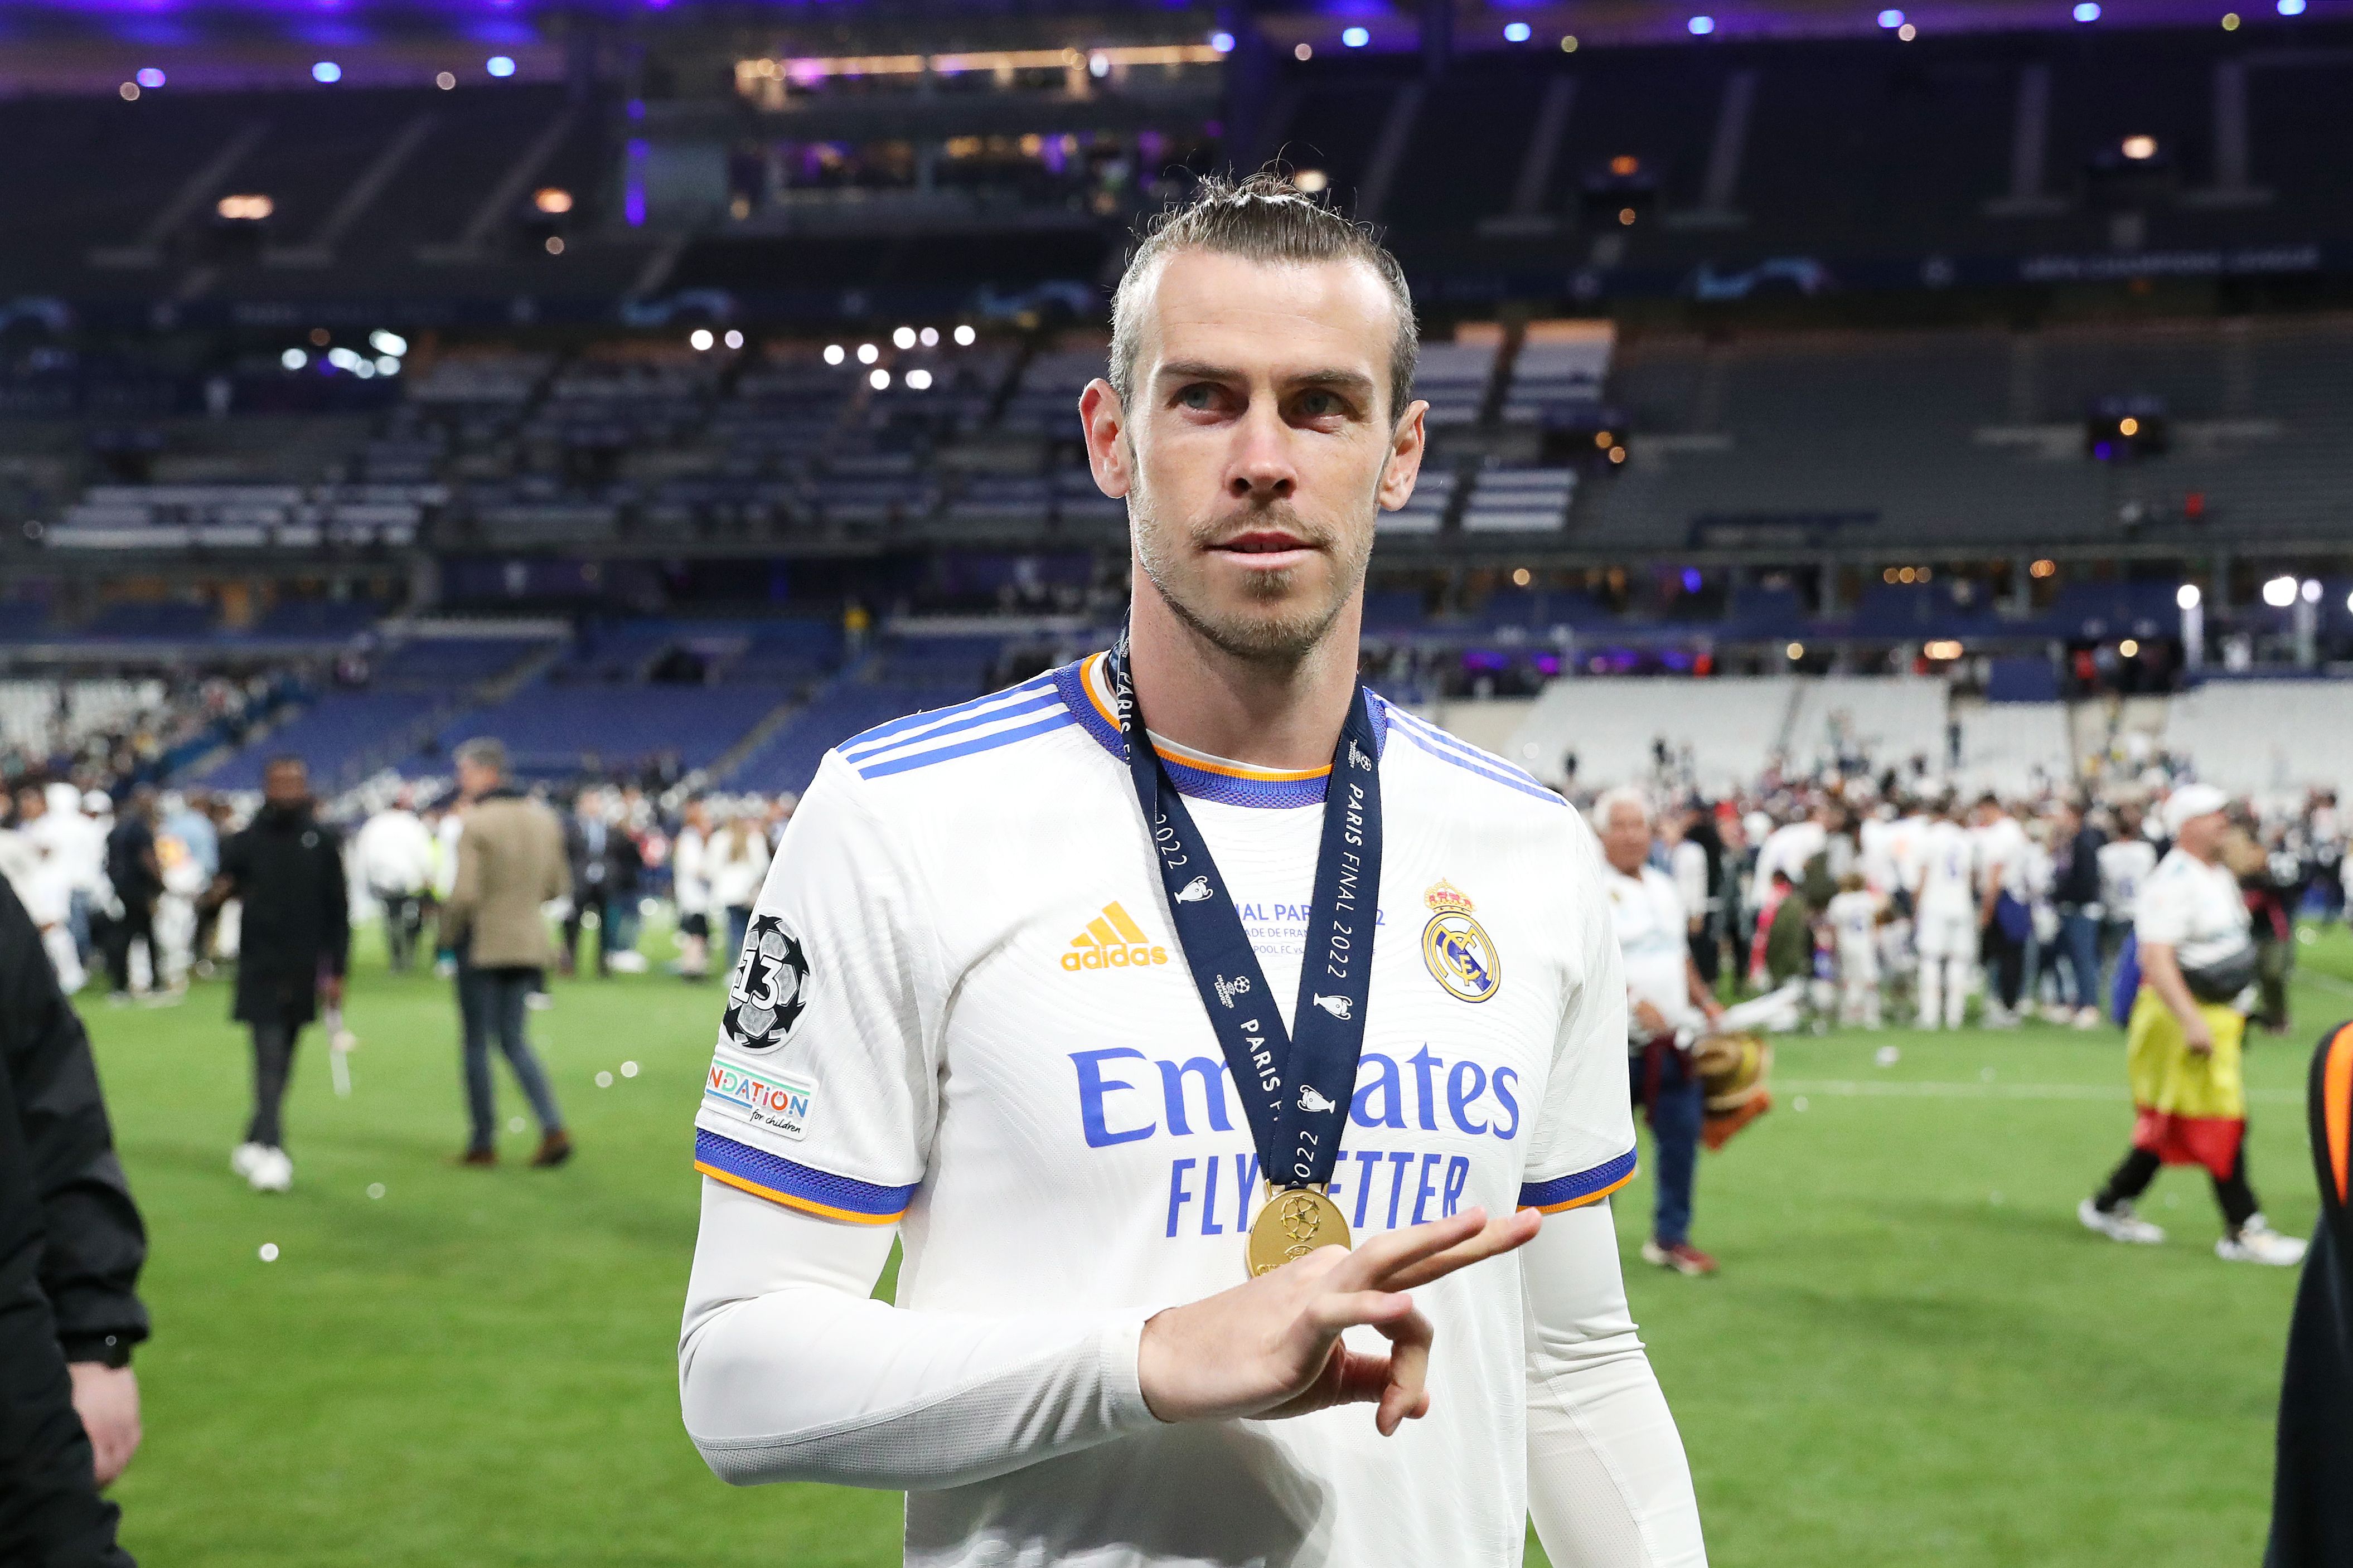 gareth bale with UCL medal